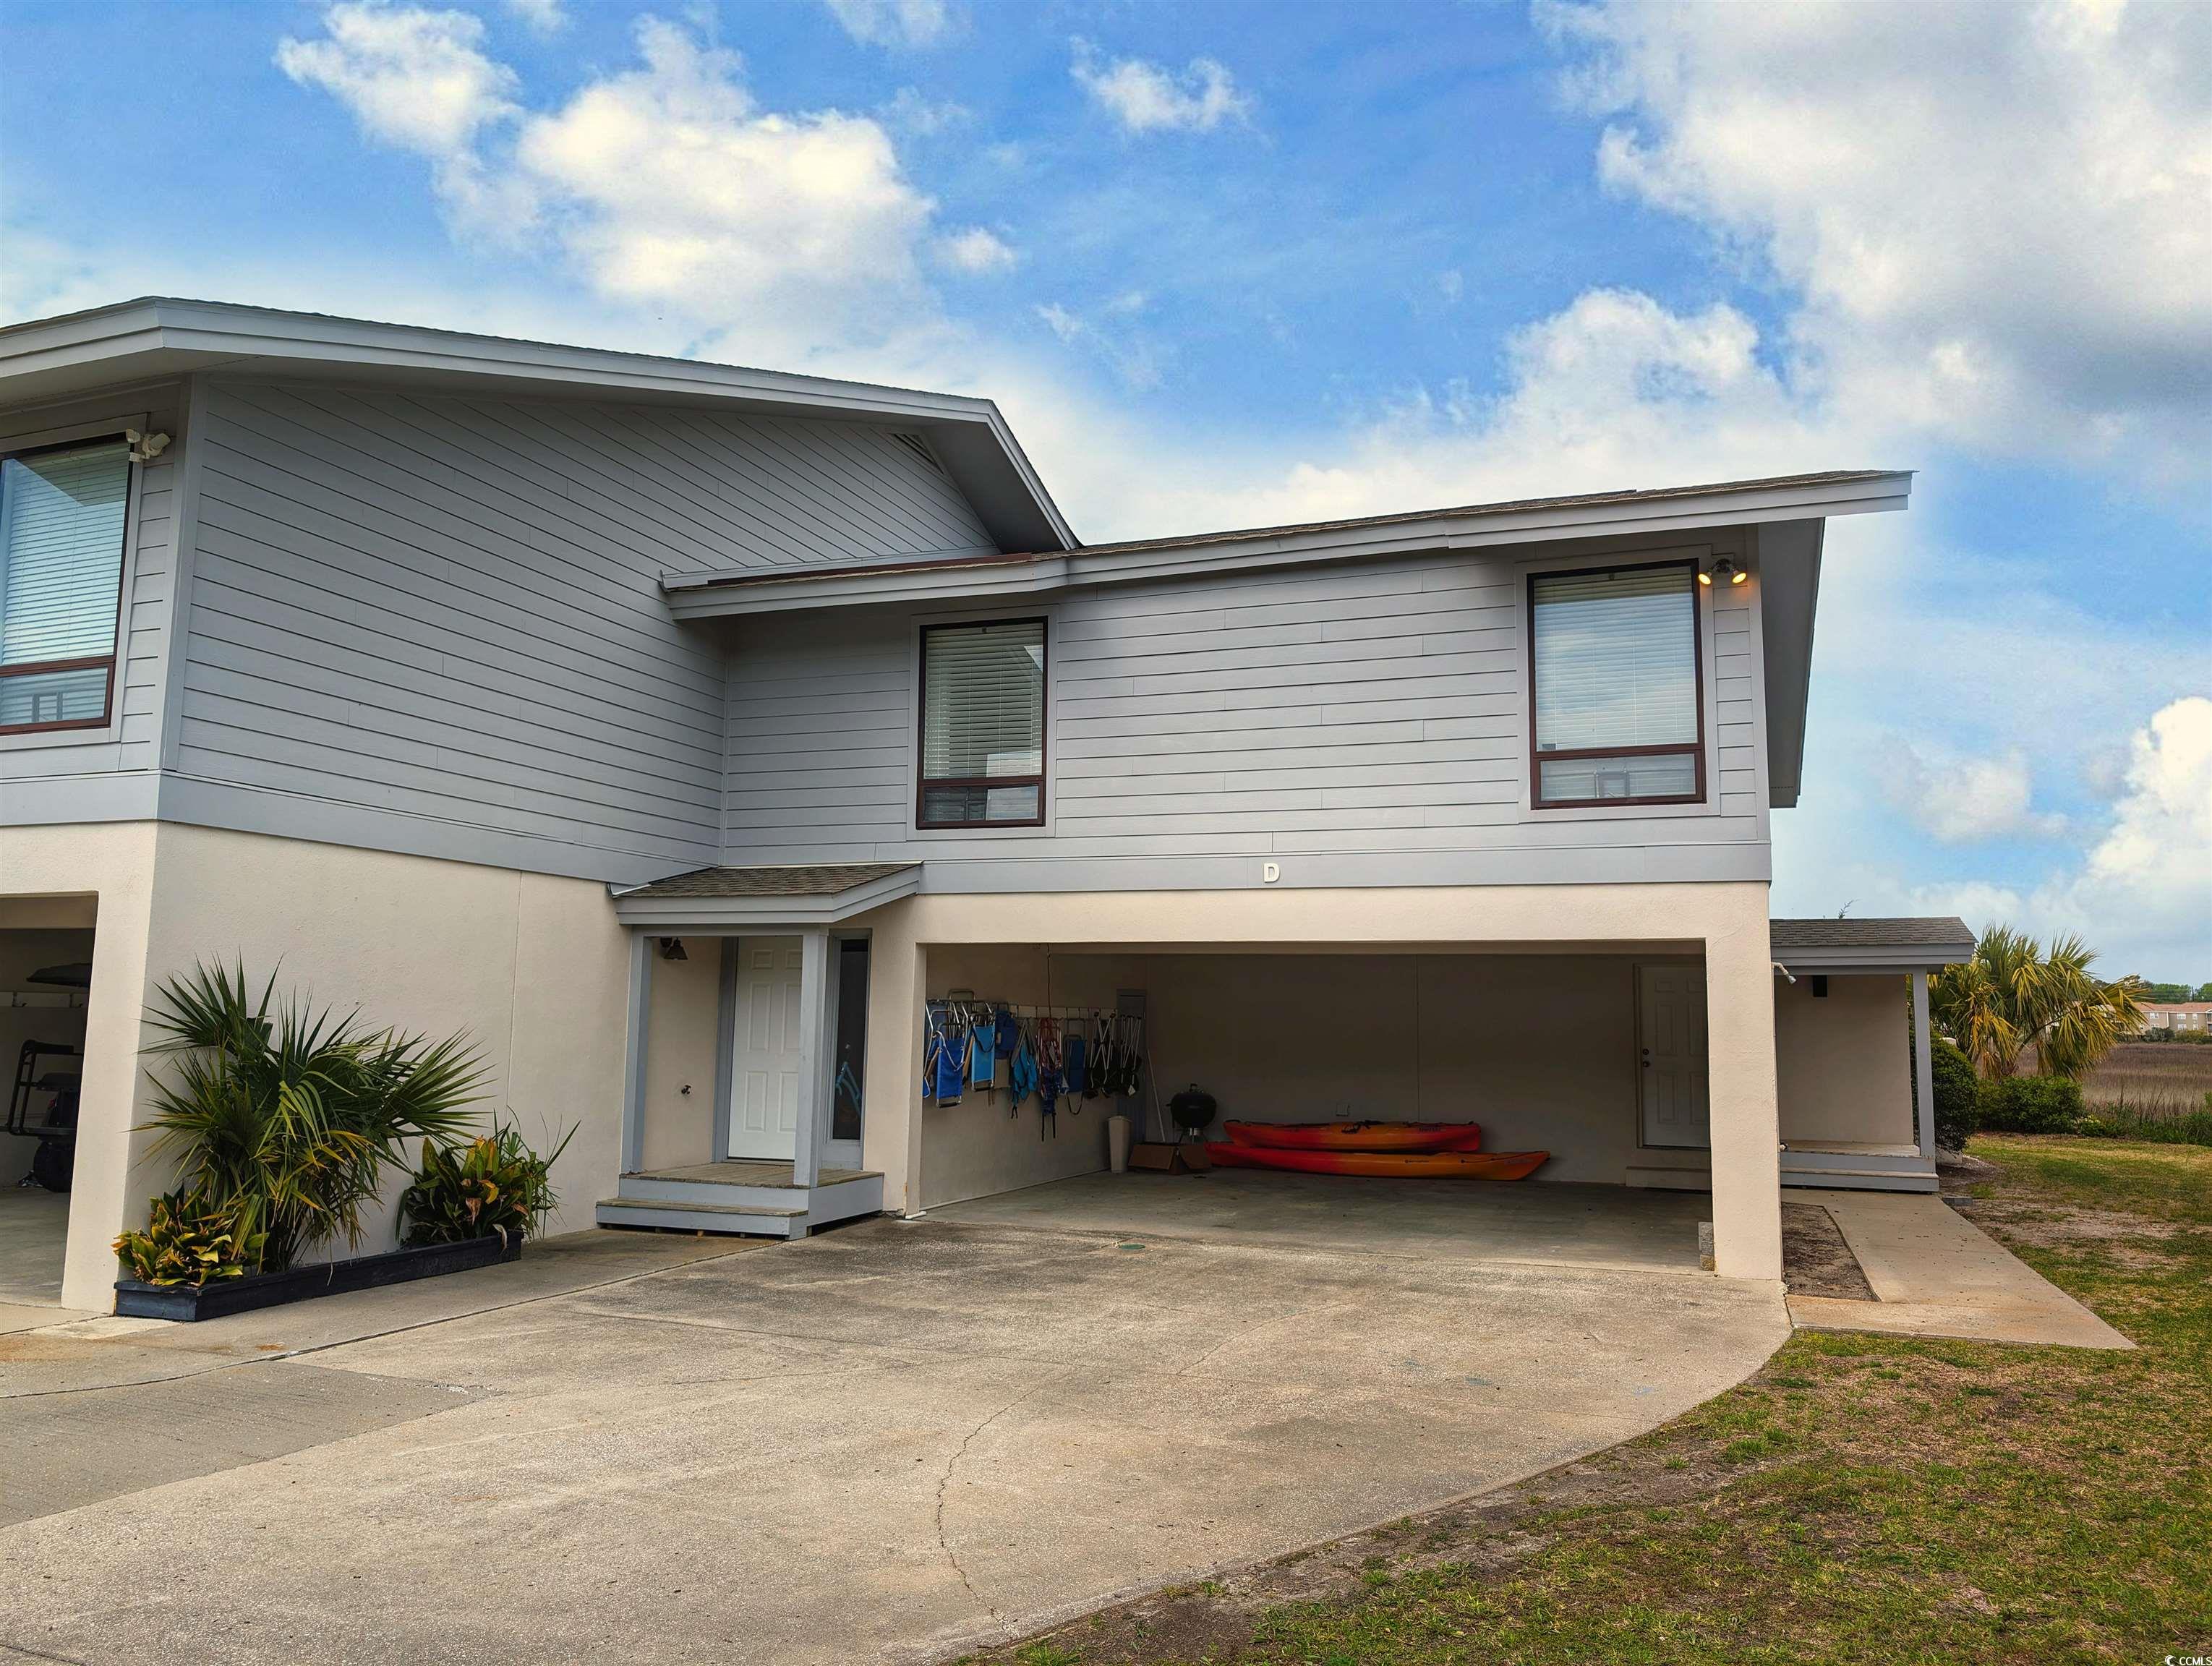 16 Inlet Point Dr. Pawleys Island, SC 29585